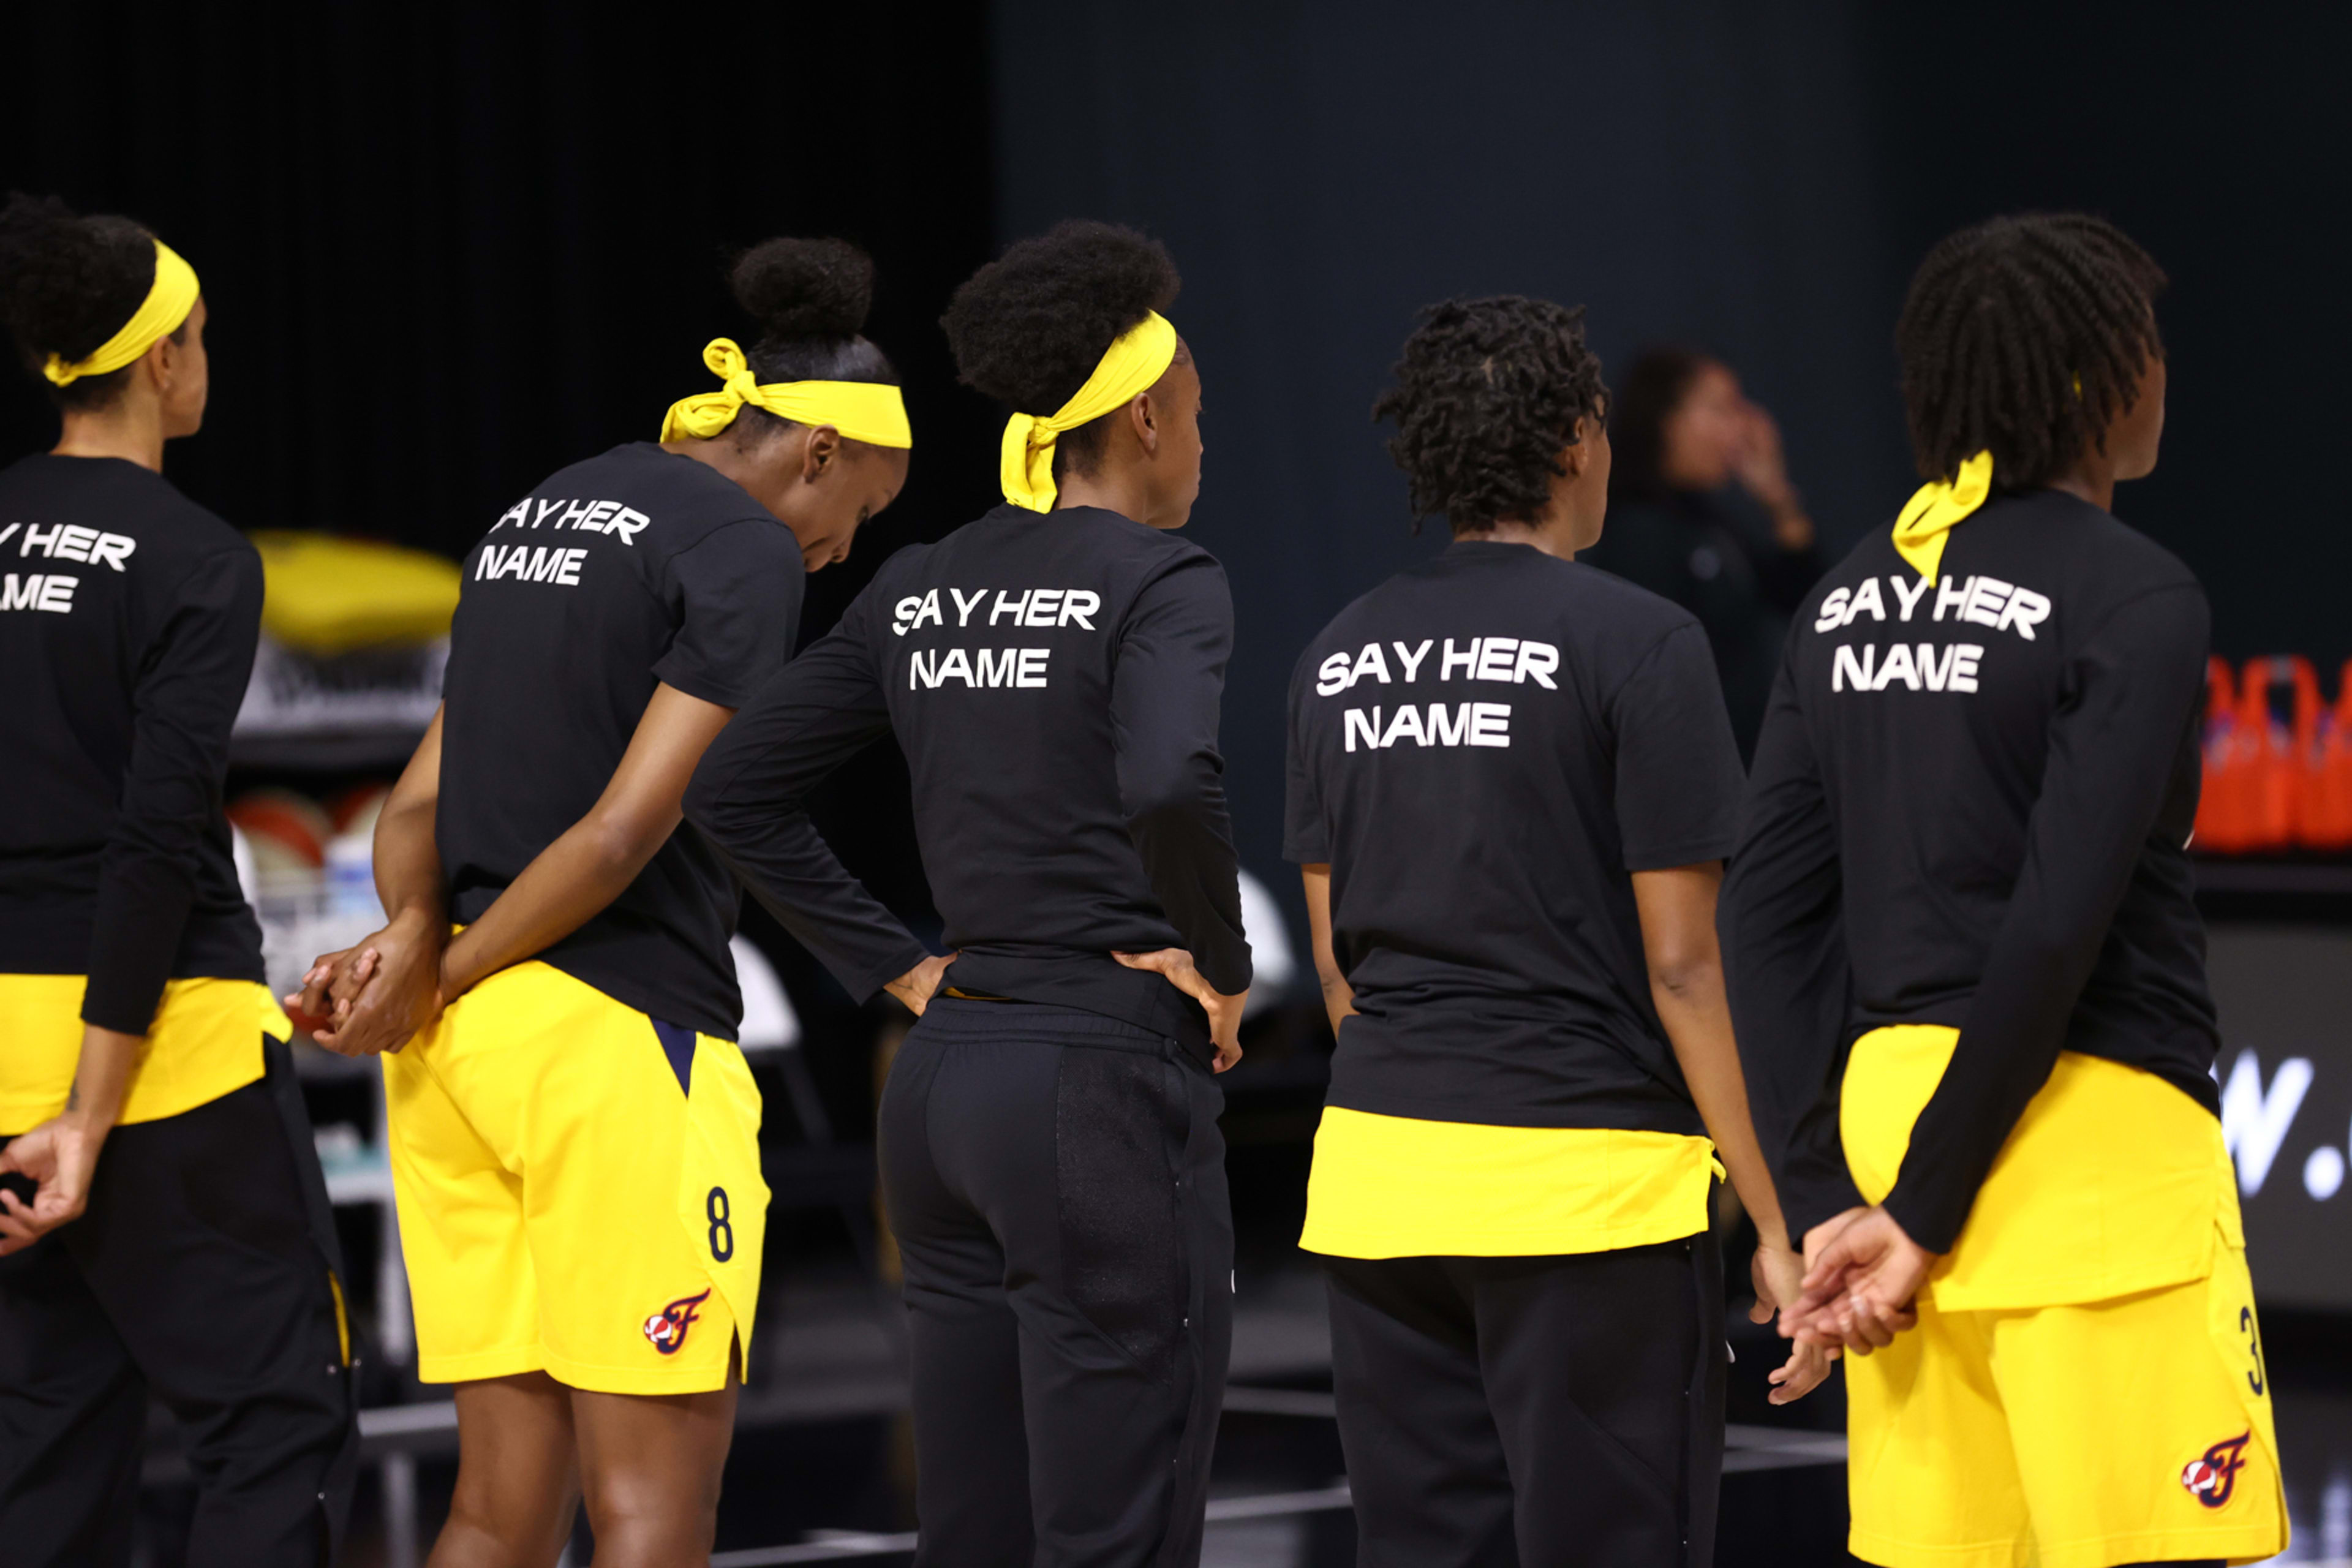 WNBA team launches class to help athletes hone their social justice advocacy